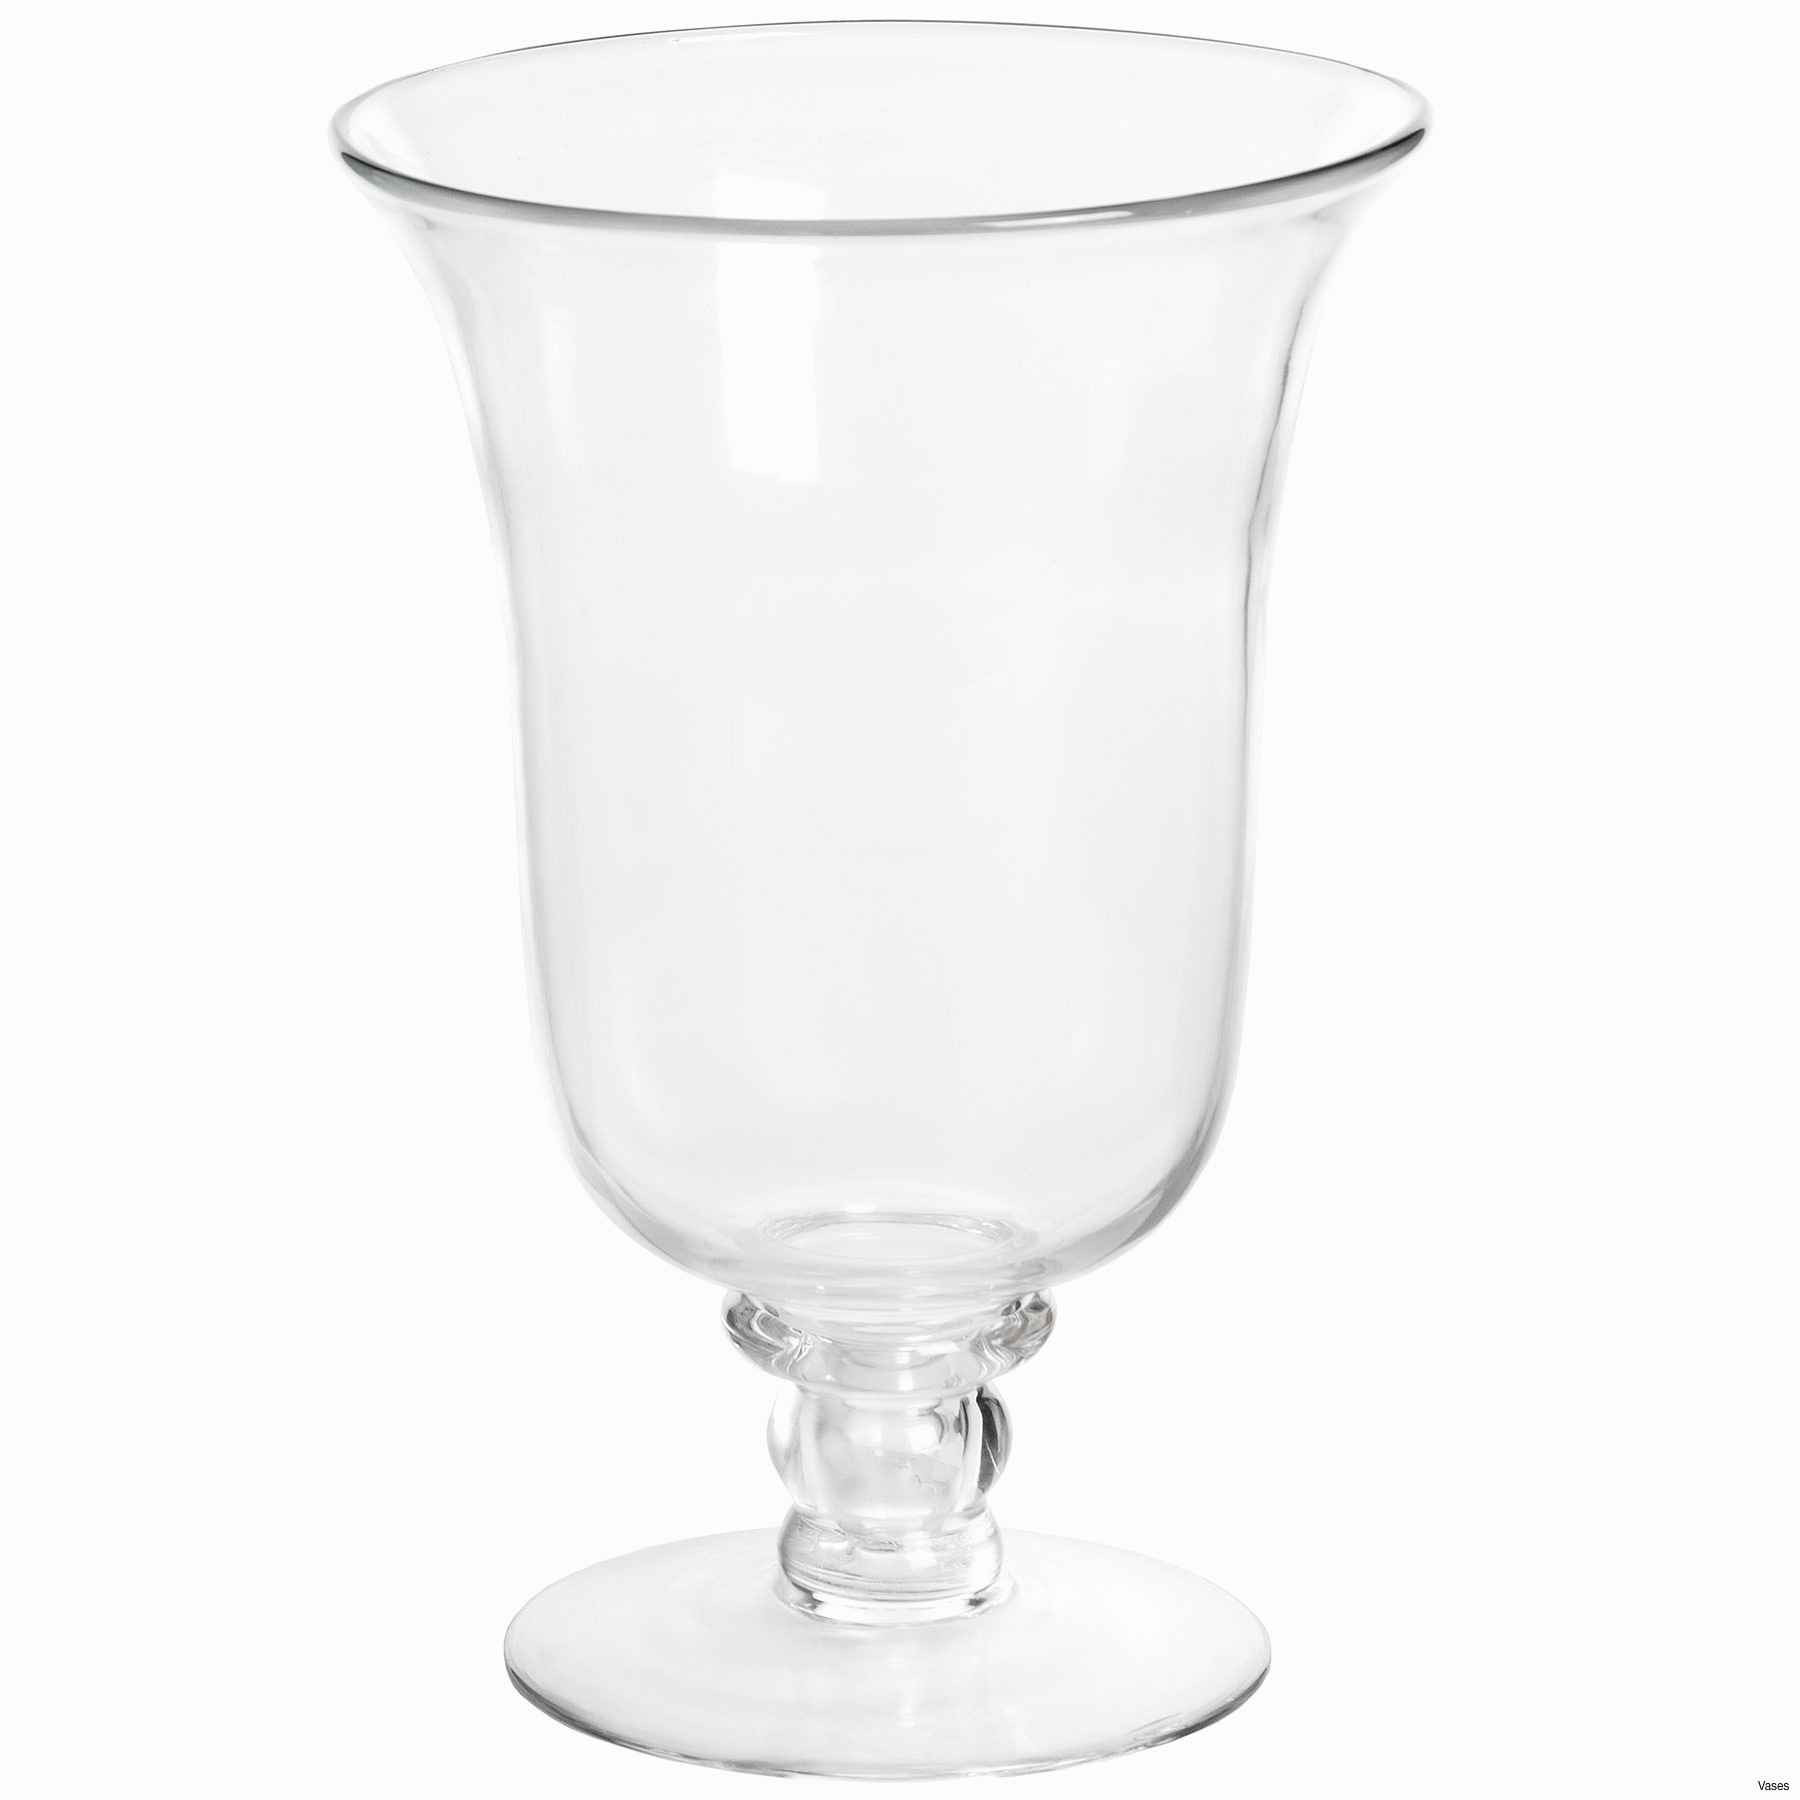 cheap crystal vases of candle stands wholesale lovely faux crystal candle holders alive in candle stands wholesale lovely faux crystal candle holders alive vases gold tall jpgi 0d cheap in